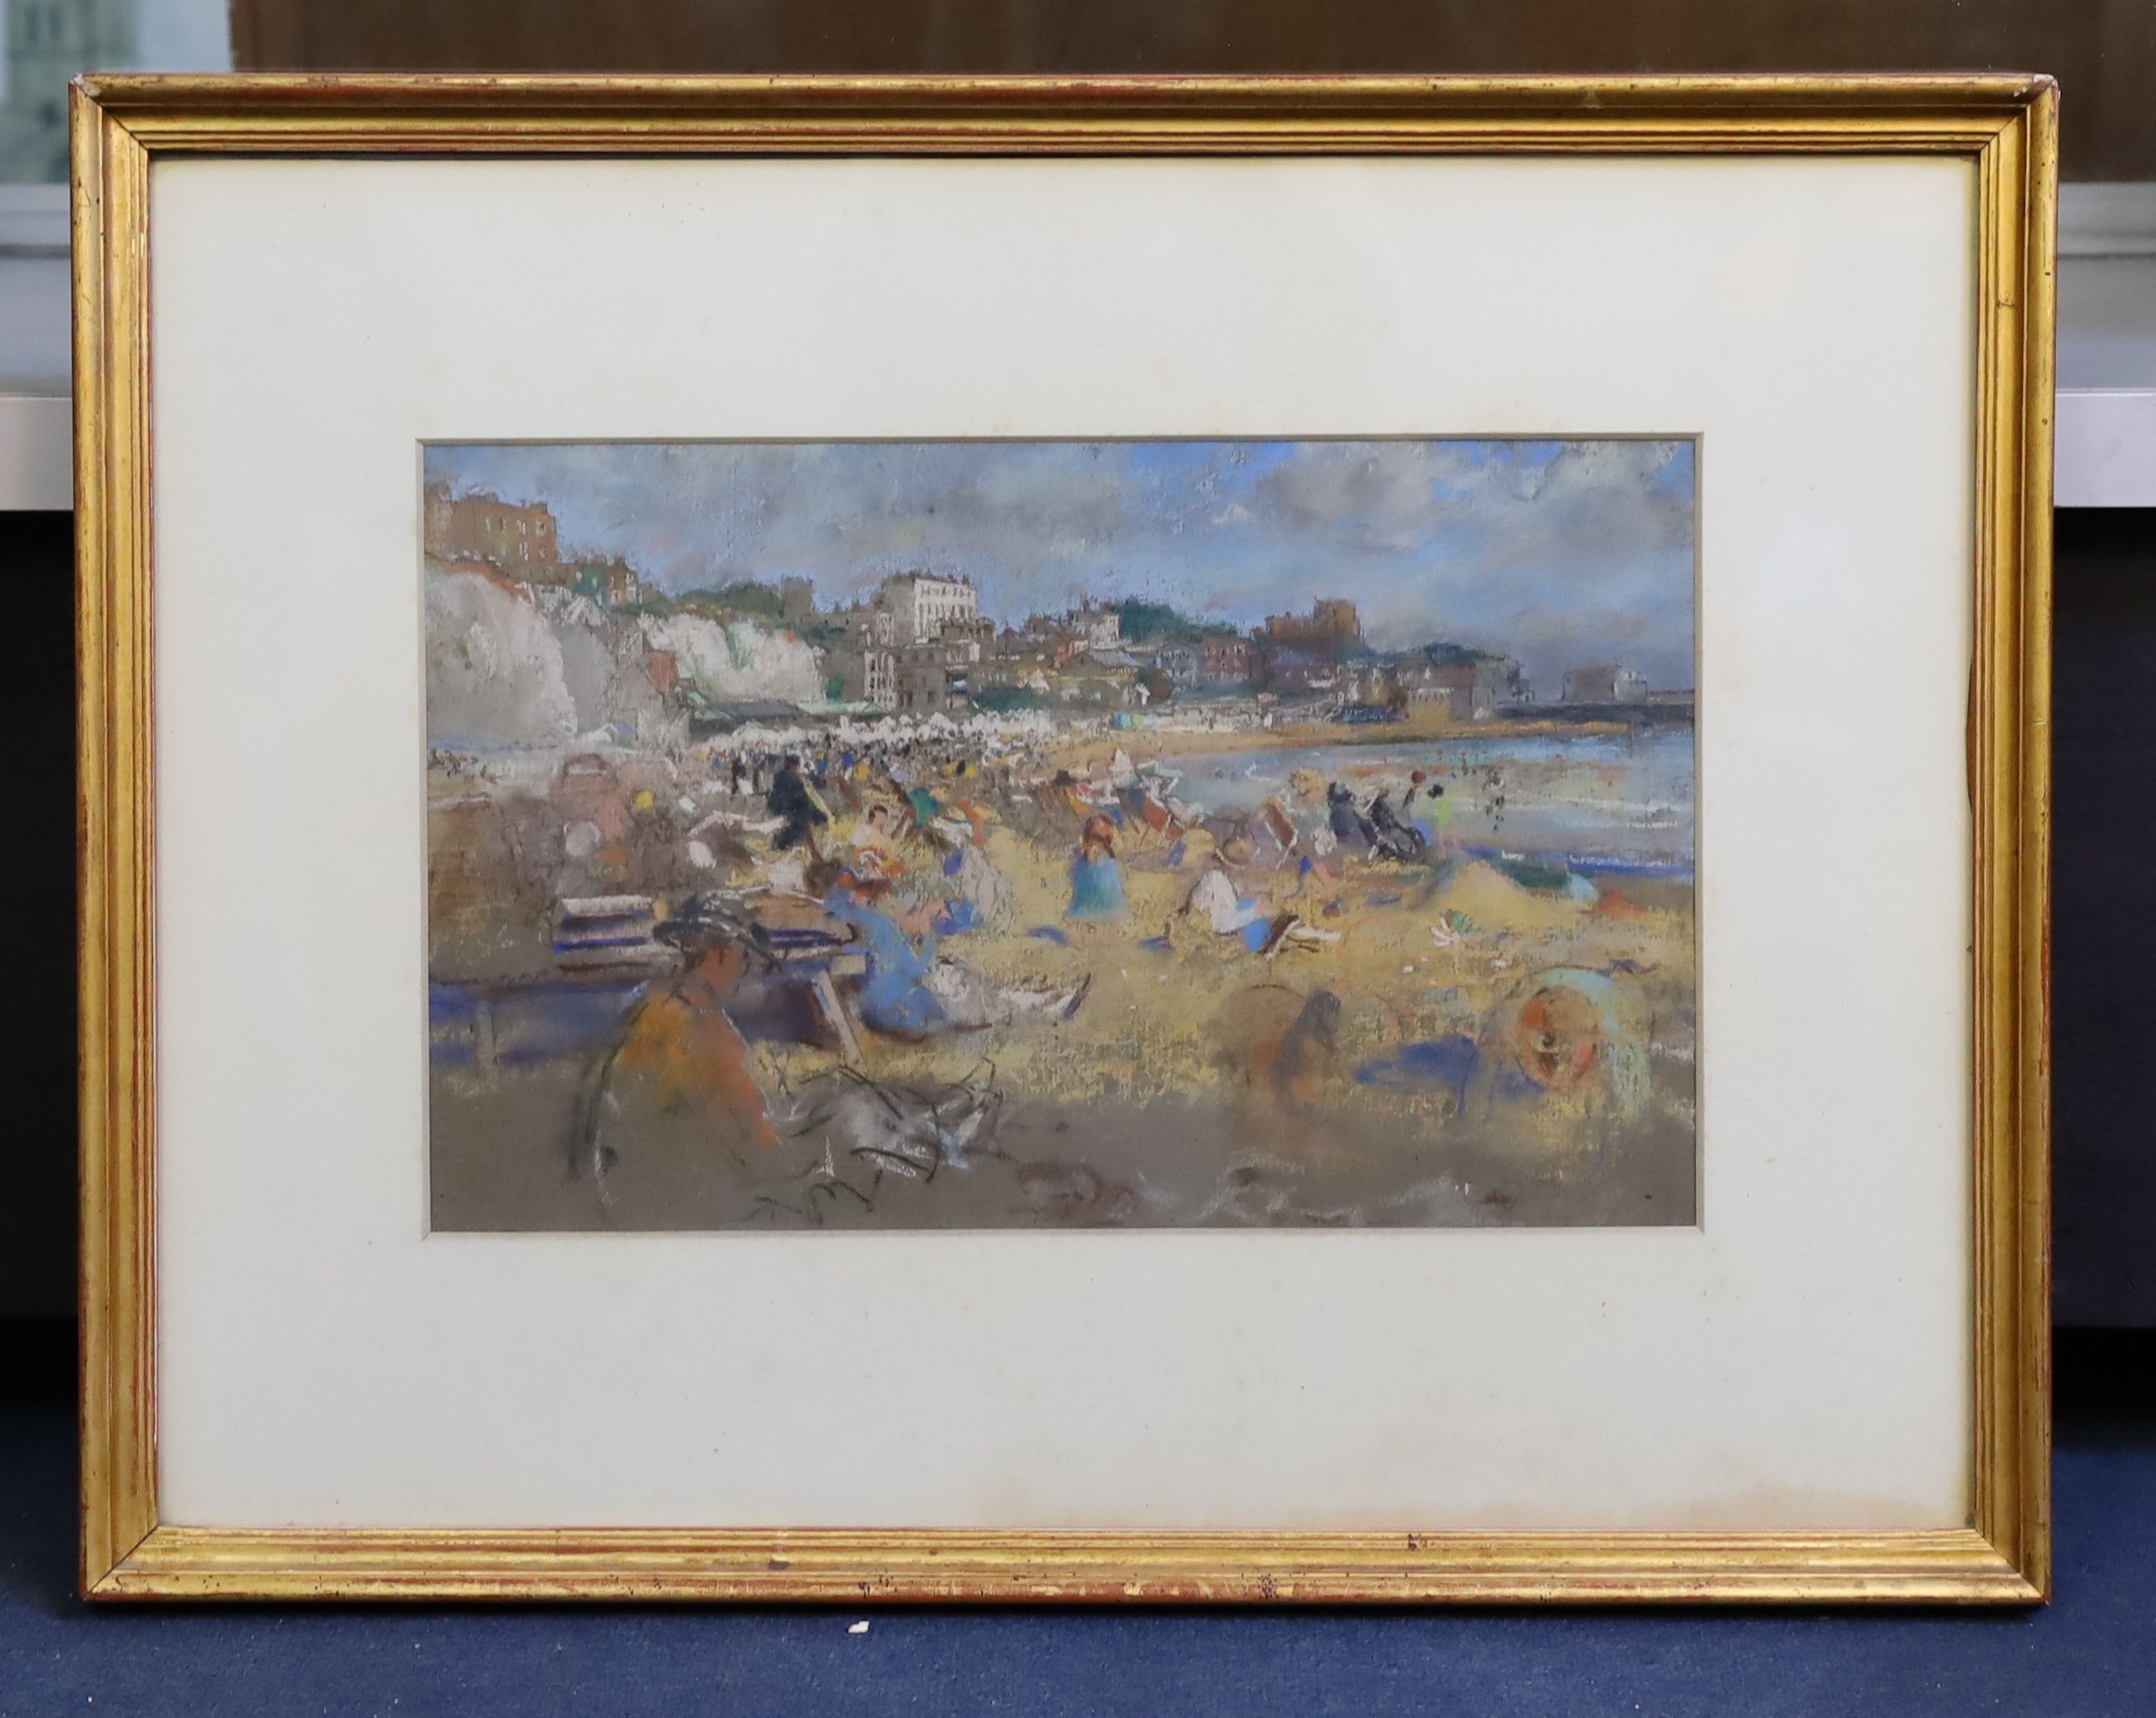 Henry Tonks (1862-1937), 'Broadstairs', pastel and watercolour on paper, 27 x 43.5cm